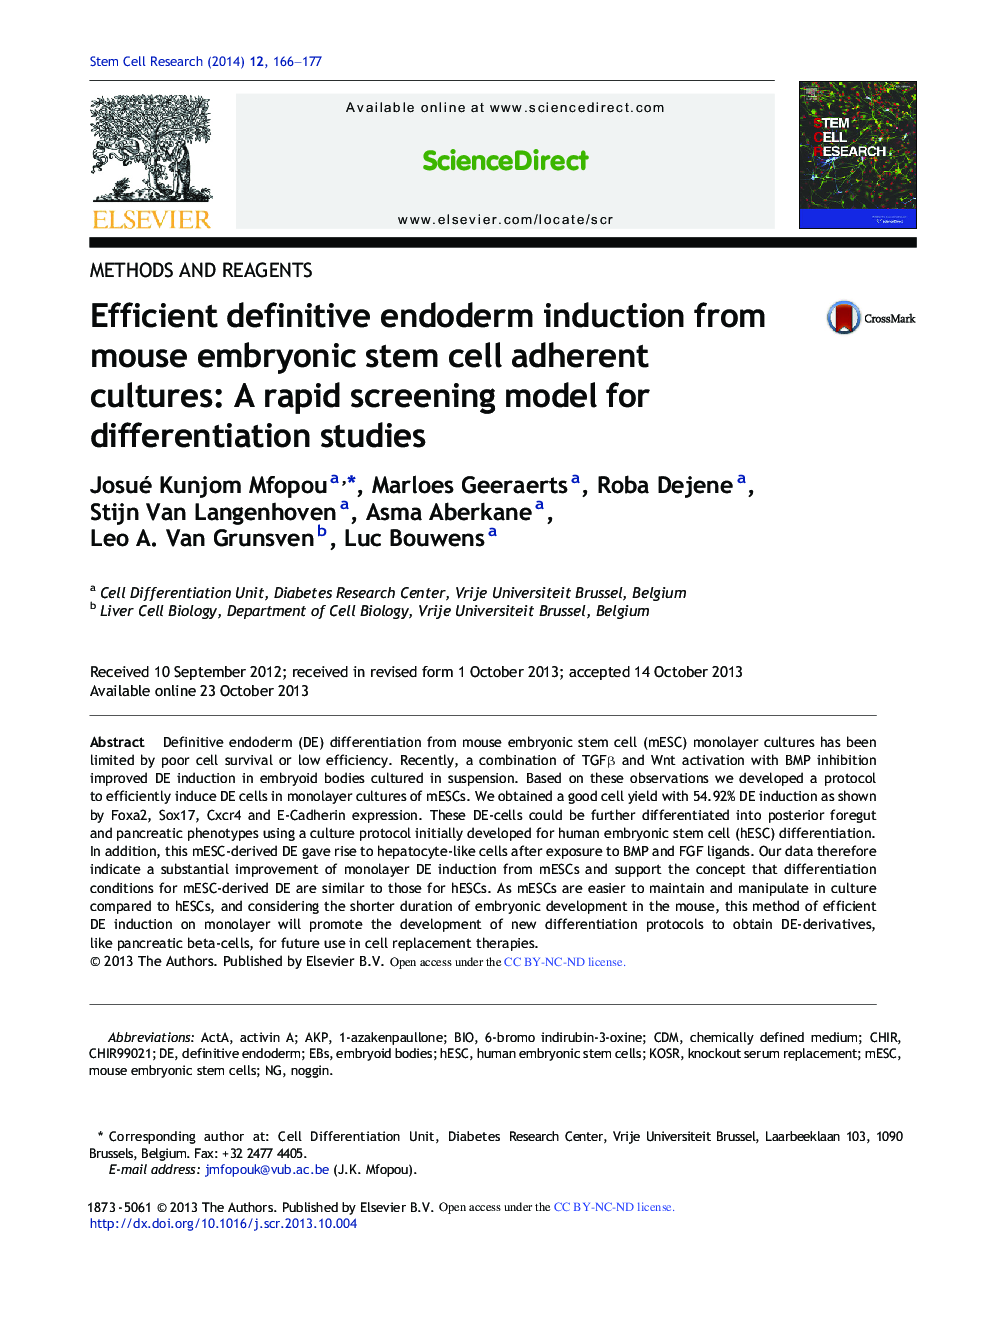 Efficient definitive endoderm induction from mouse embryonic stem cell adherent cultures: A rapid screening model for differentiation studies